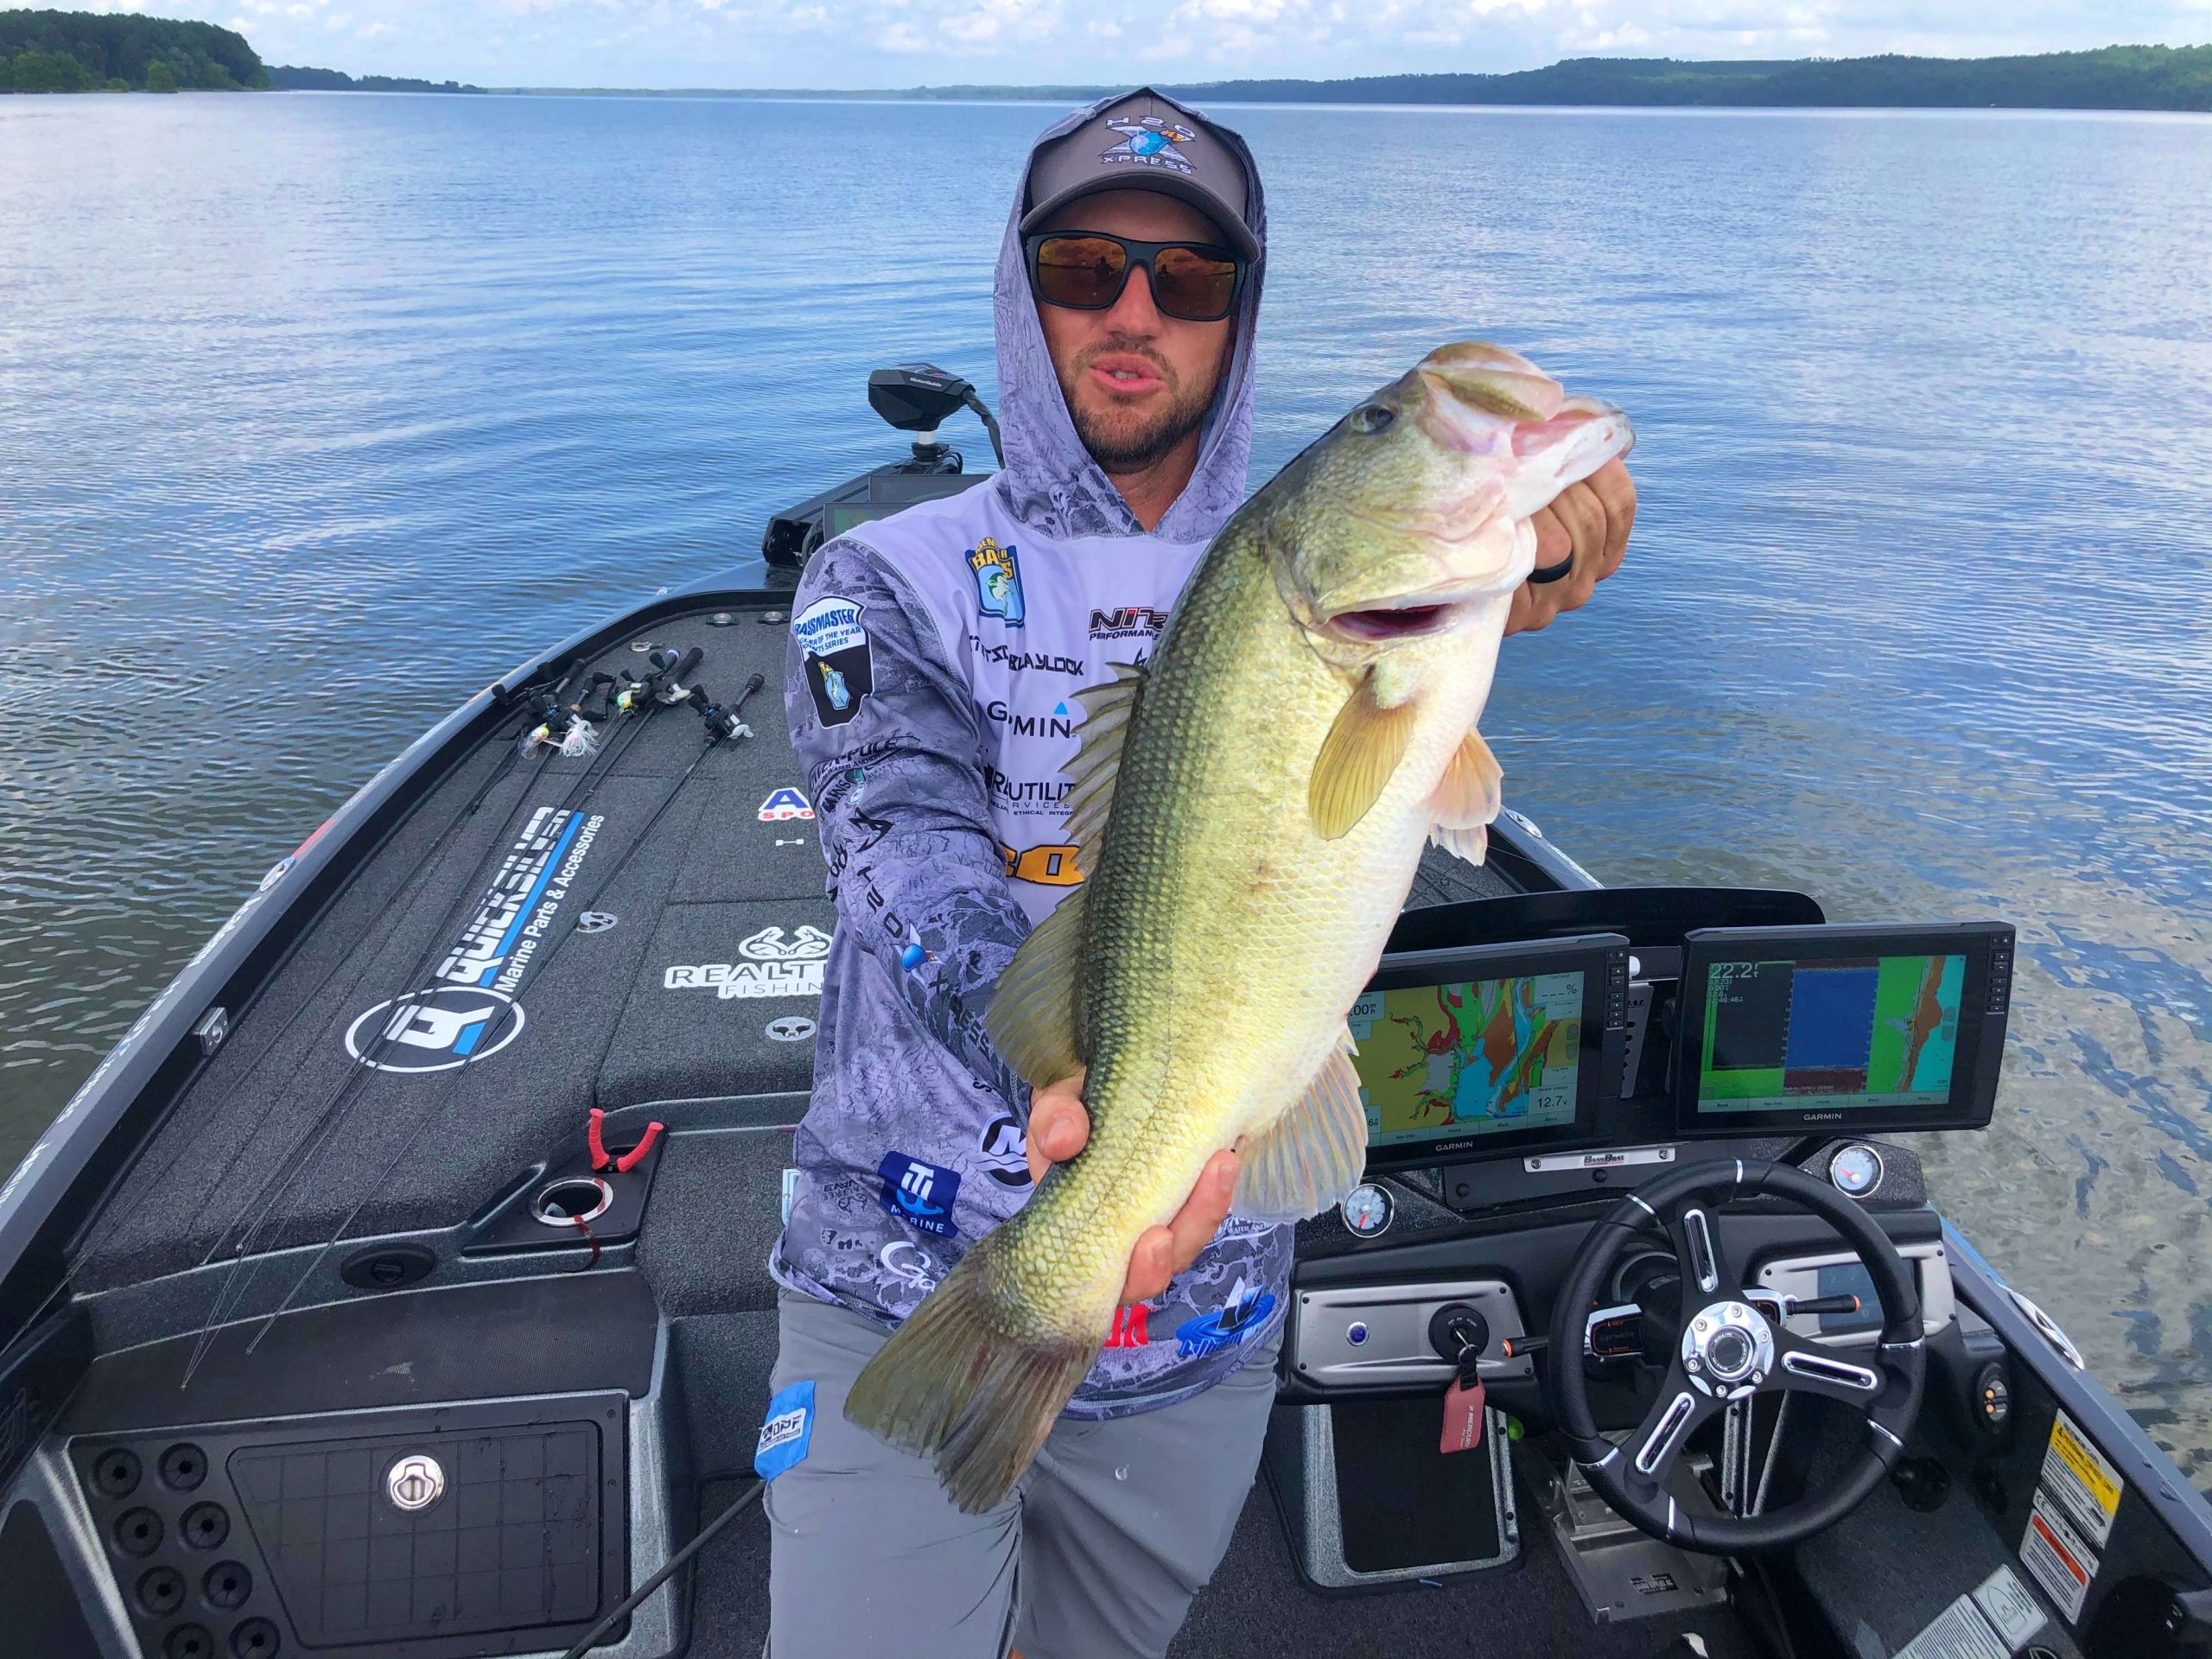 After a slow agonizing period of time that had him questioning some of his decisions of the day, Garmin Pro, Stetson Blaylock, makes a big time cull to boost his confidence!